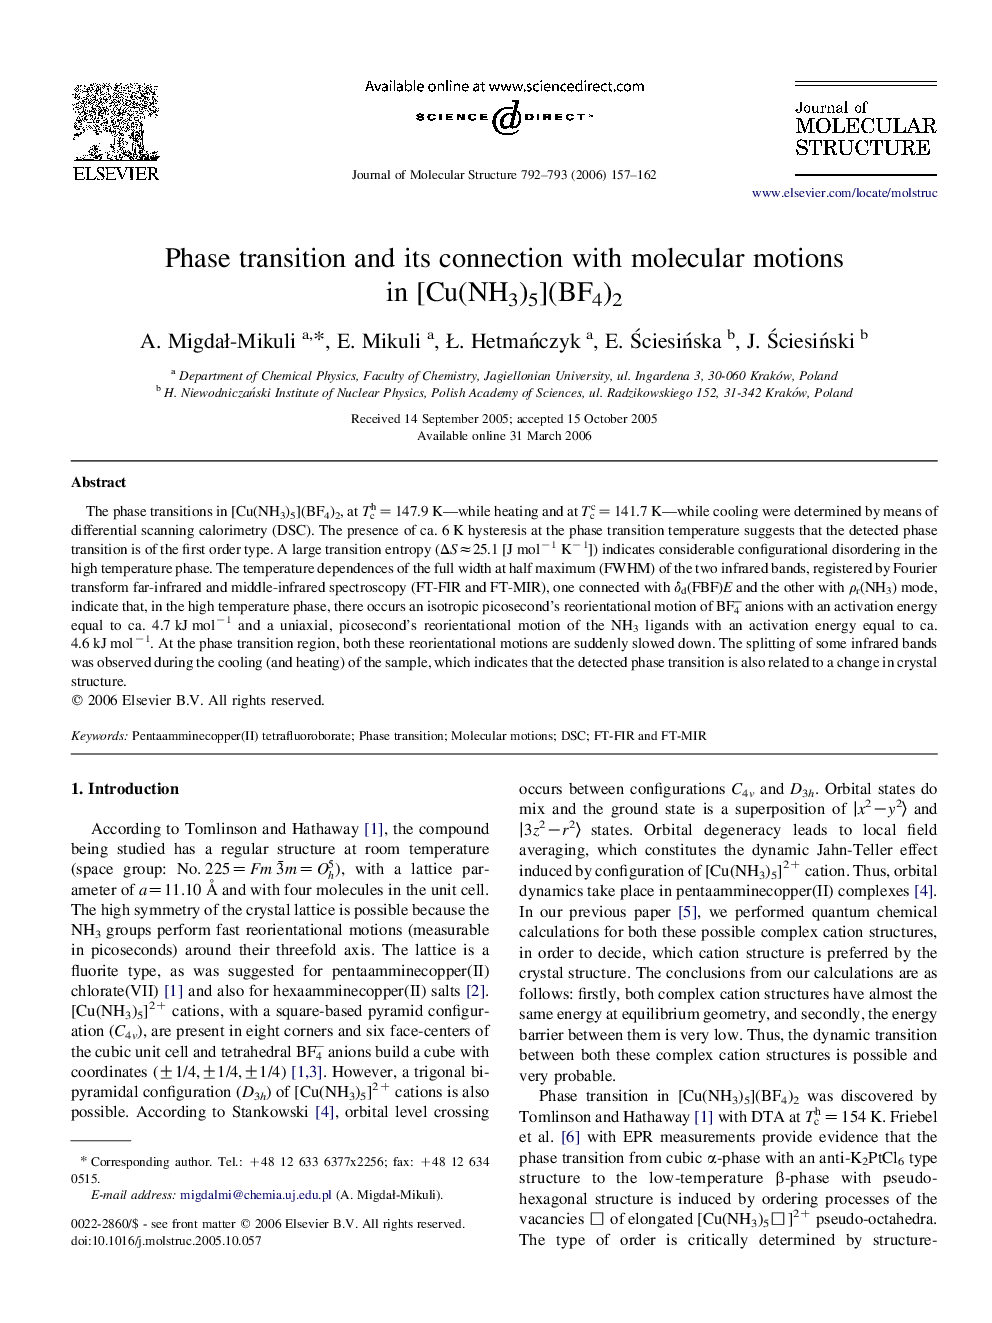 Phase transition and its connection with molecular motions in [Cu(NH3)5](BF4)2